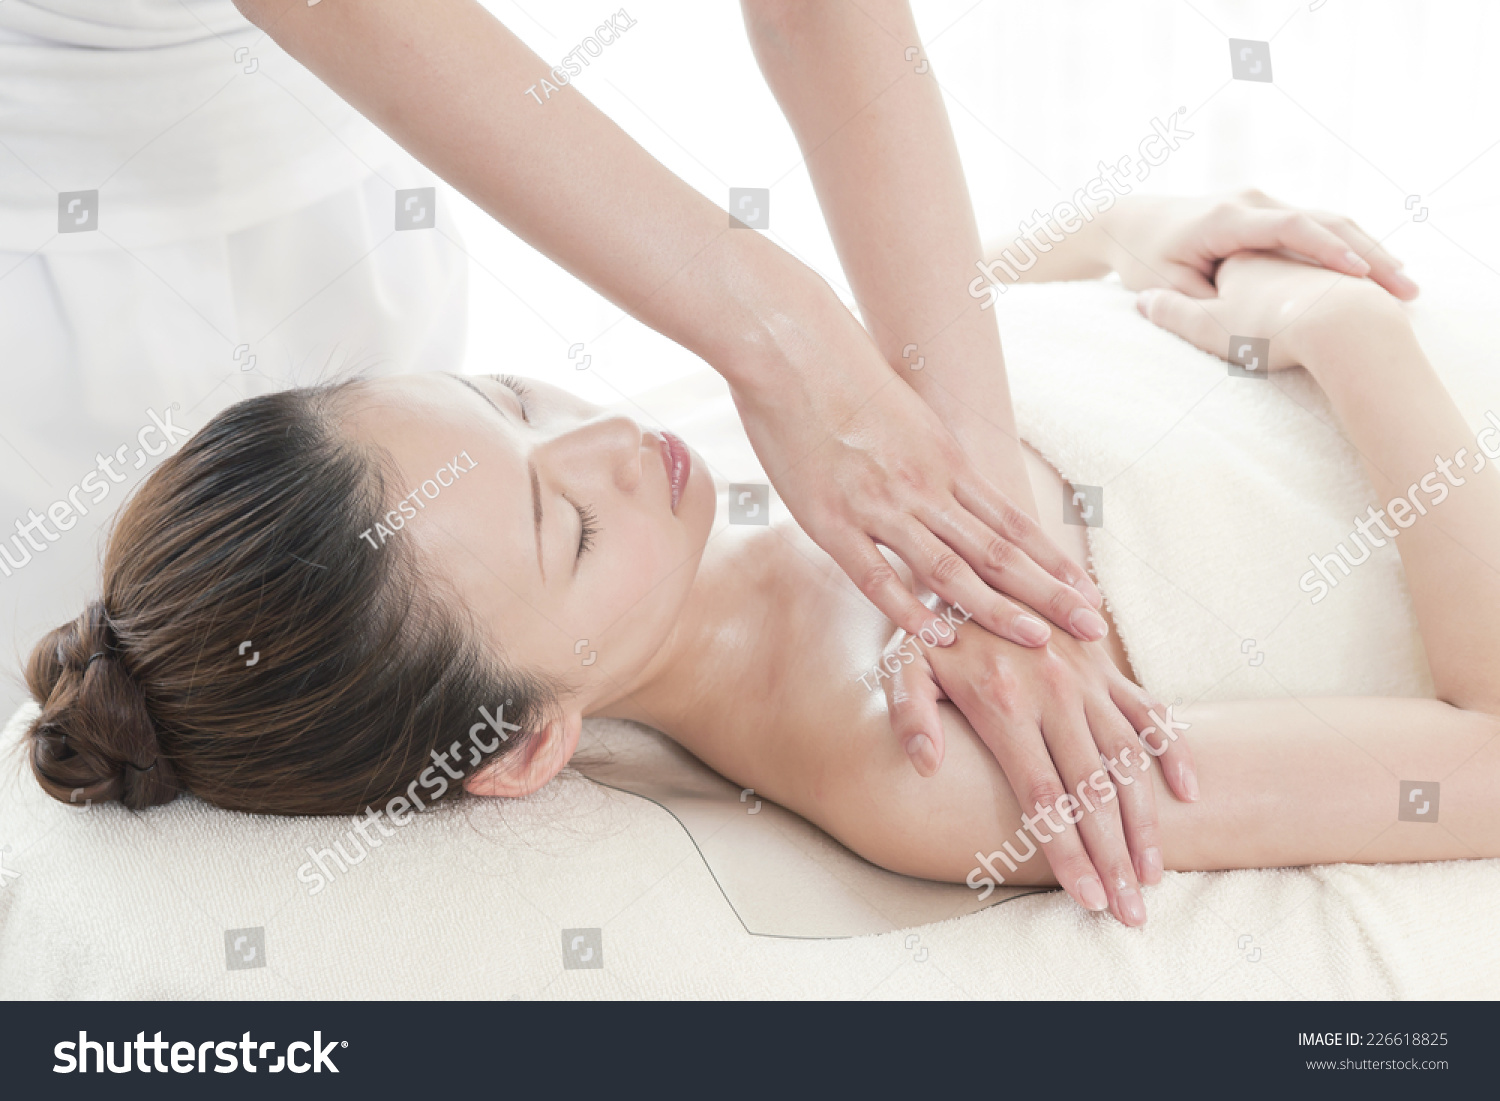 bhavyang patel recommends japanese oil massage therapy pic